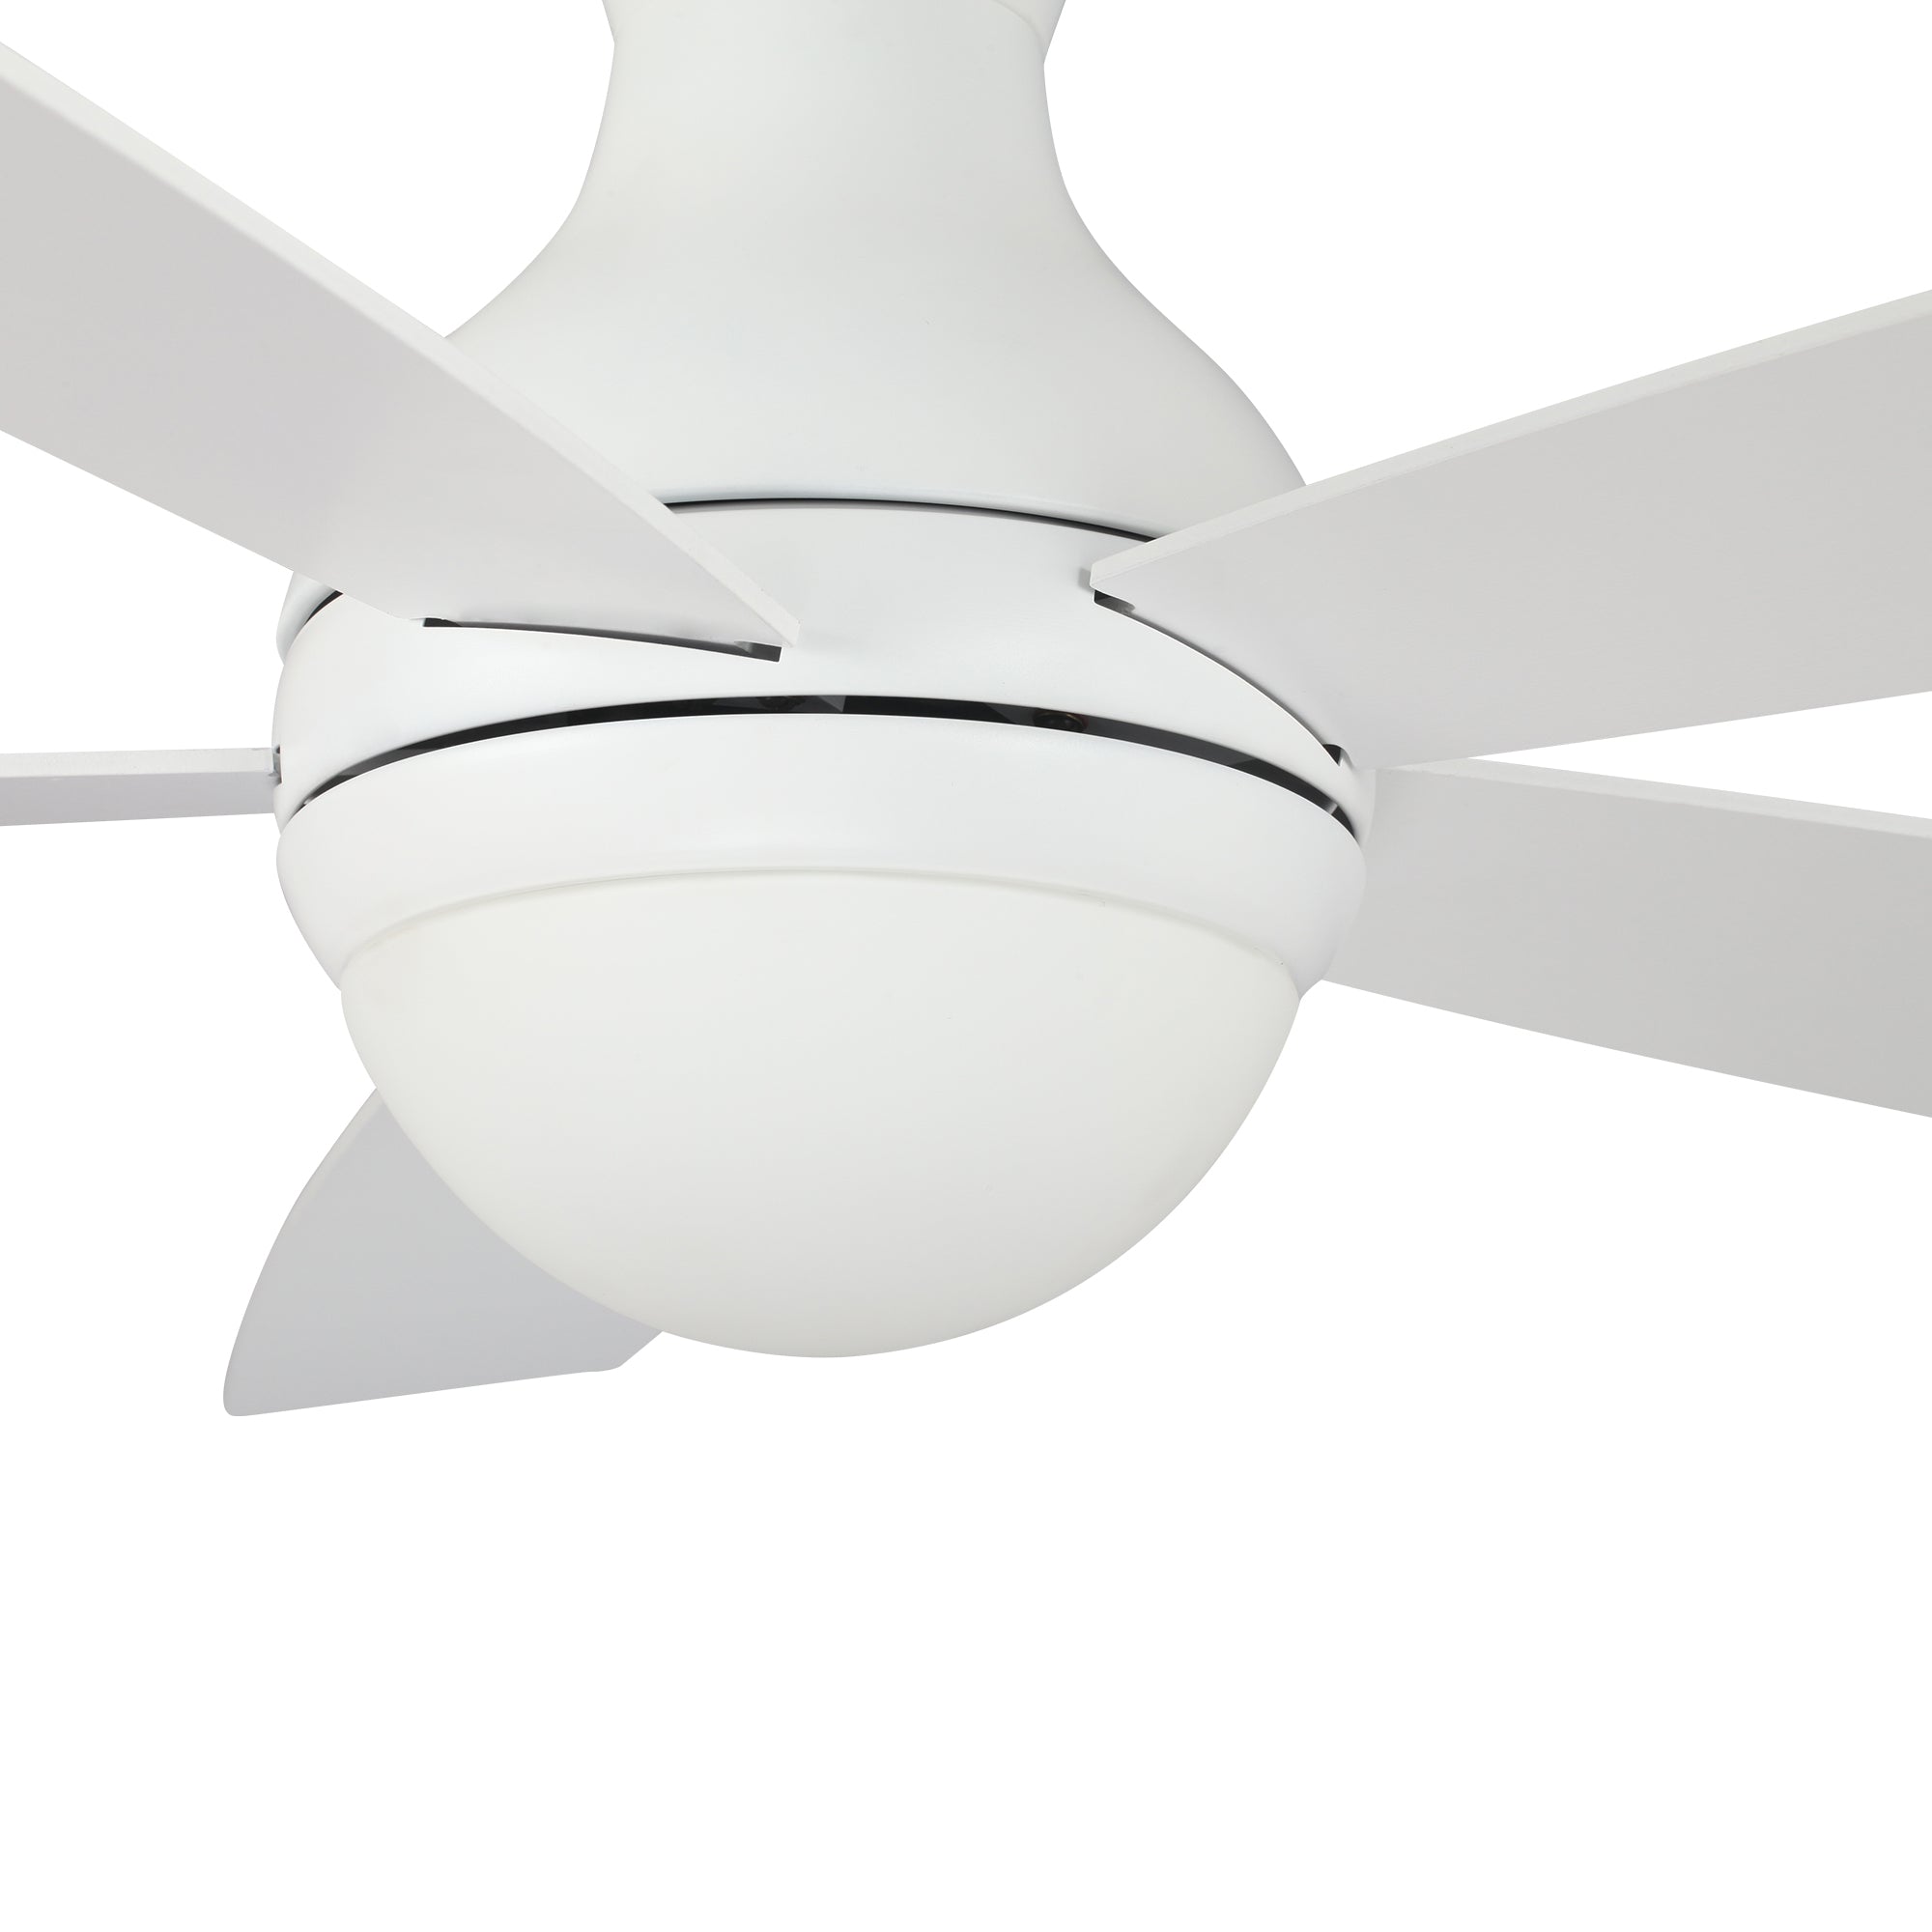 This Fannin 52&#39;&#39; smart ceiling fan keeps your space cool, bright, and stylish. It is a soft modern masterpiece perfect for your large indoor living spaces. This Wifi smart ceiling fan is a simplicity designing with White finish, use elegant Plywood blades and has an integrated 4000K LED cool light. The fan features Remote control, Wi-Fi apps, Siri Shortcut and Voice control technology (compatible with Amazon Alexa and Google Home Assistant ) to set fan preferences.